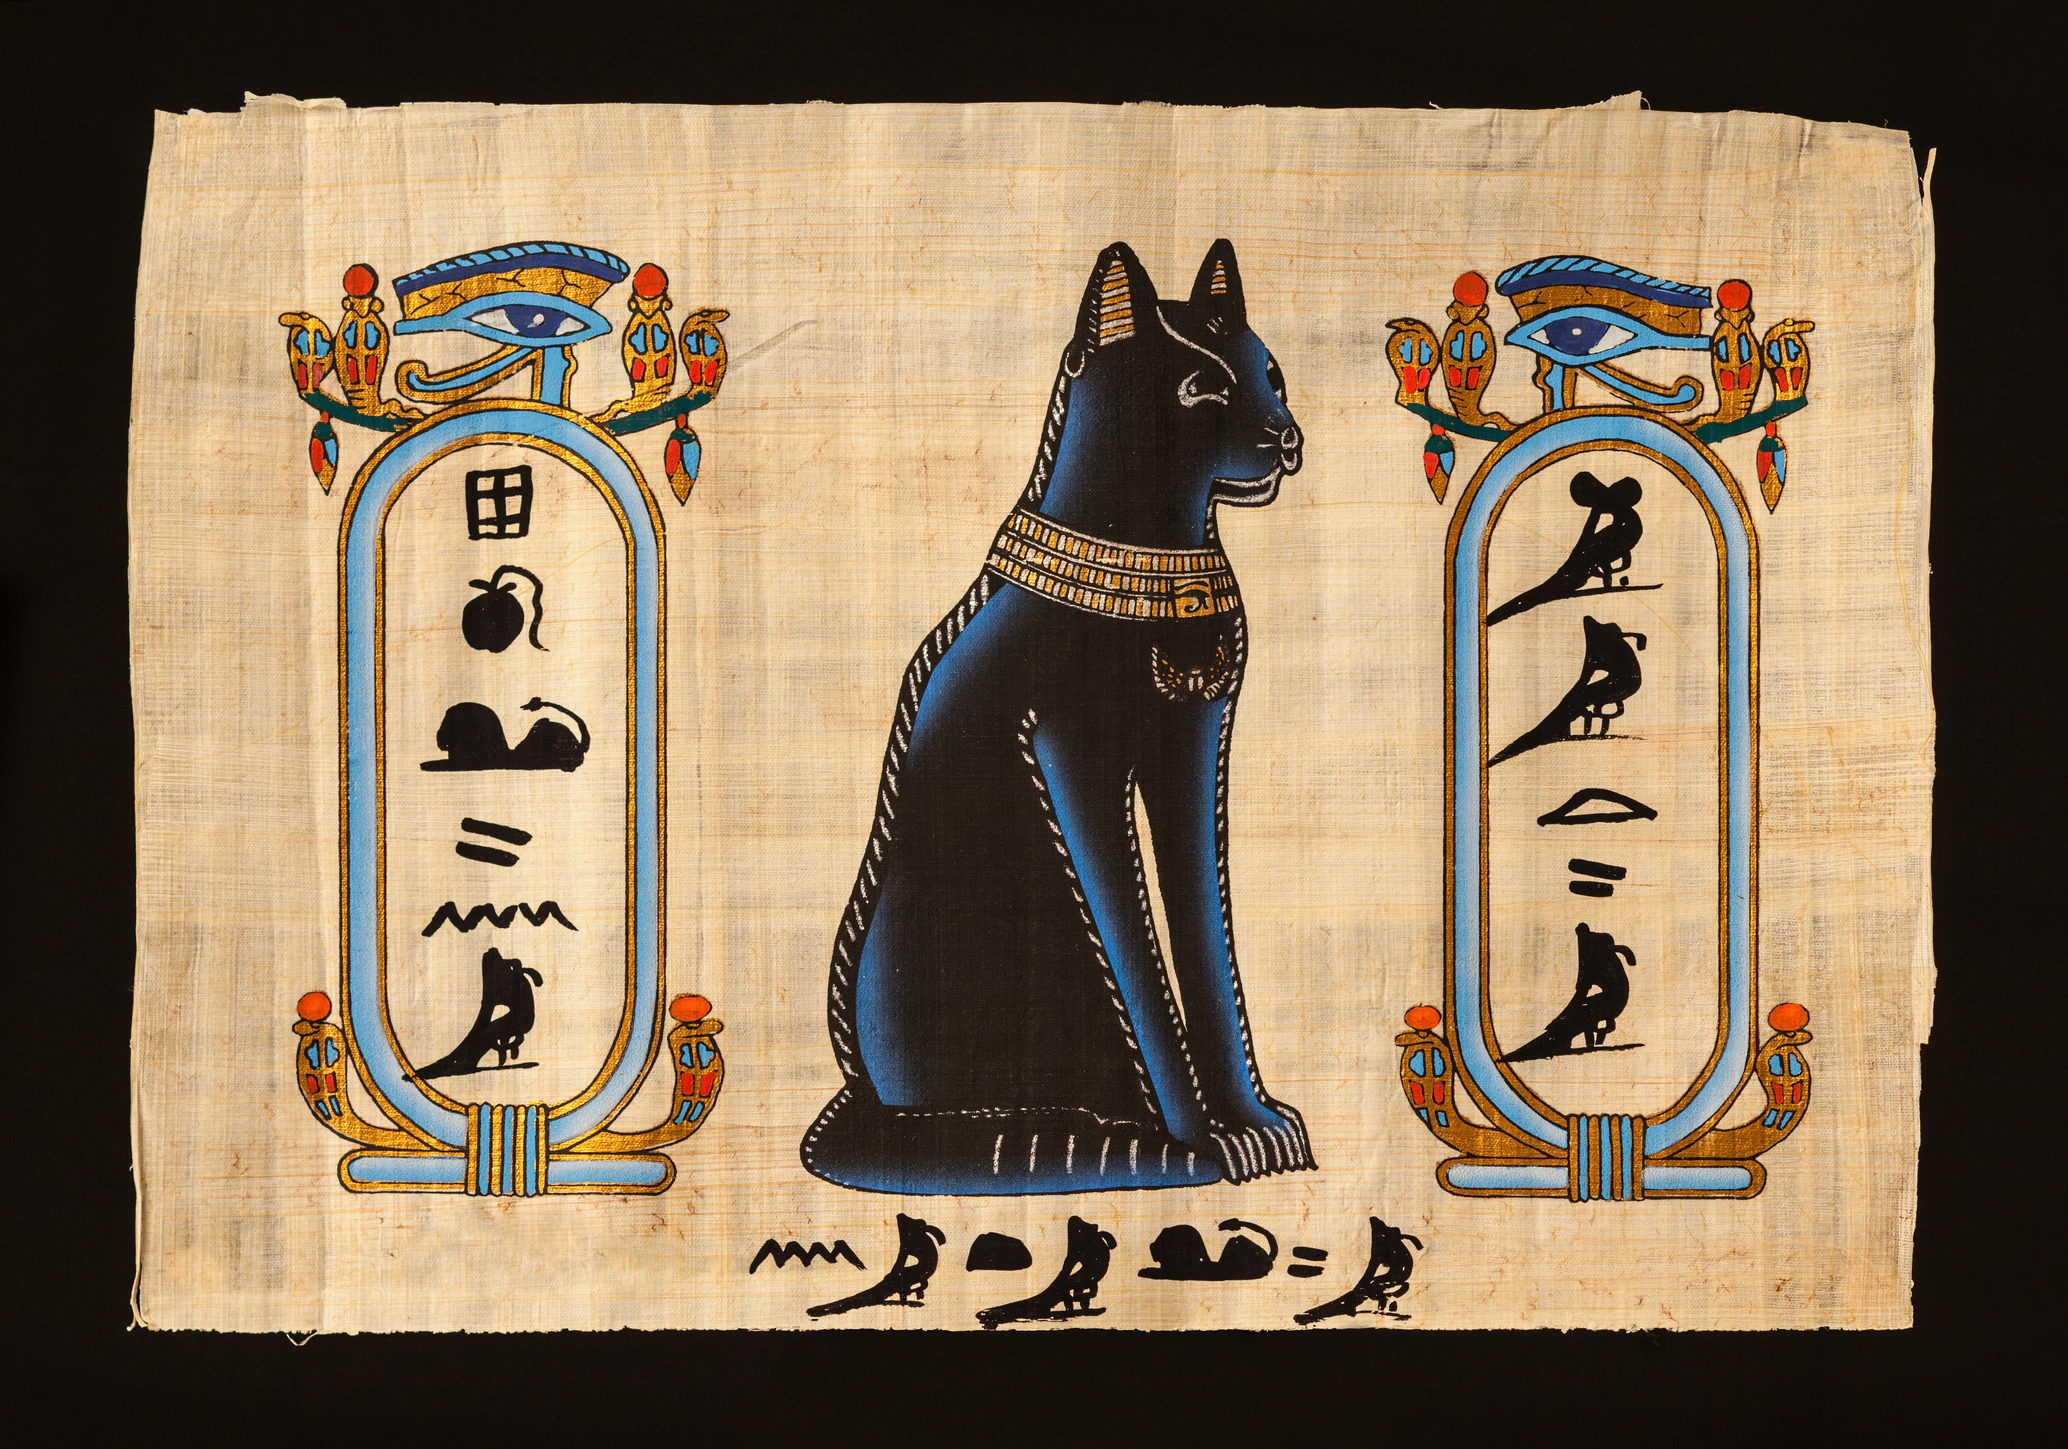 An illustration of a cat in Ancient Egypt.